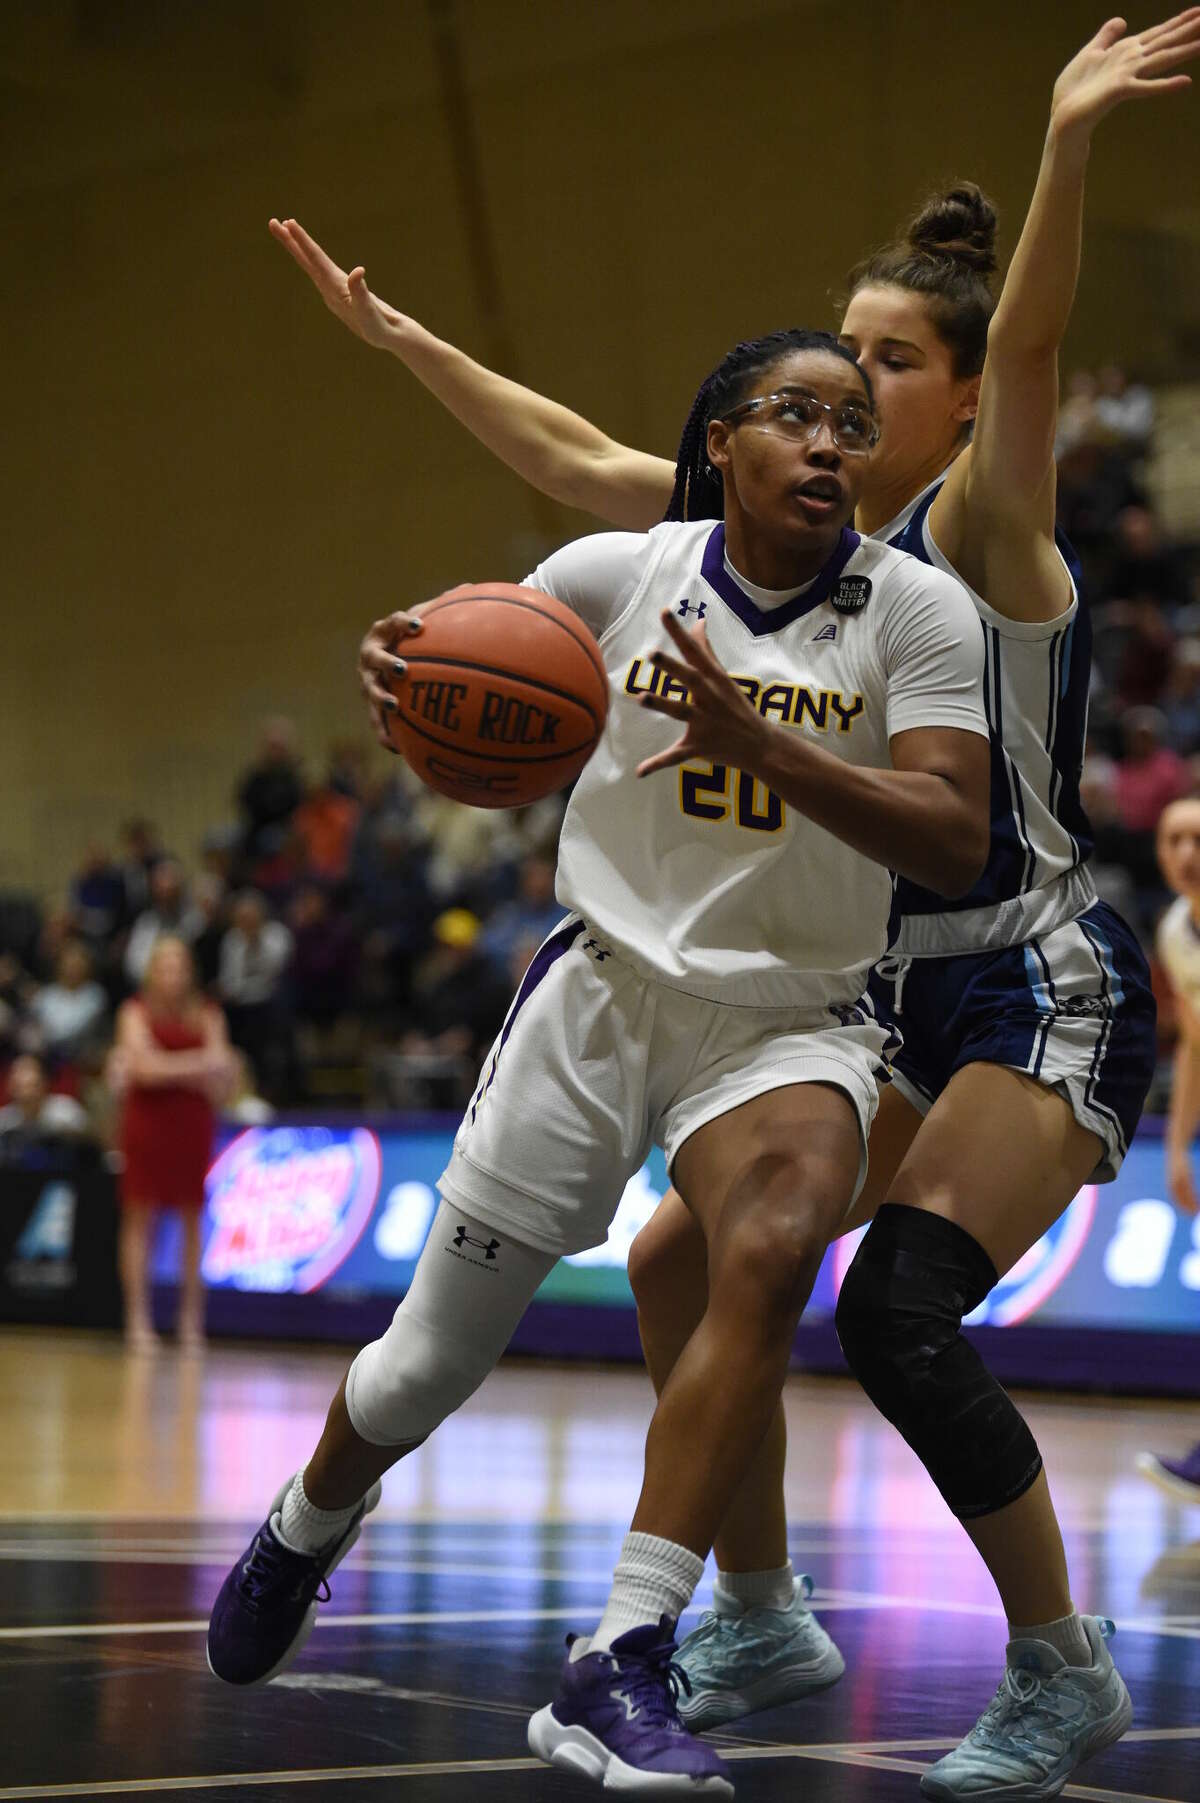 UAlbany junior guard Kayla Cooper, shown earlier this season, had 18 points and 11 rebounds in a loss to UMass in the WNIT on Friday, March 17, 2023.